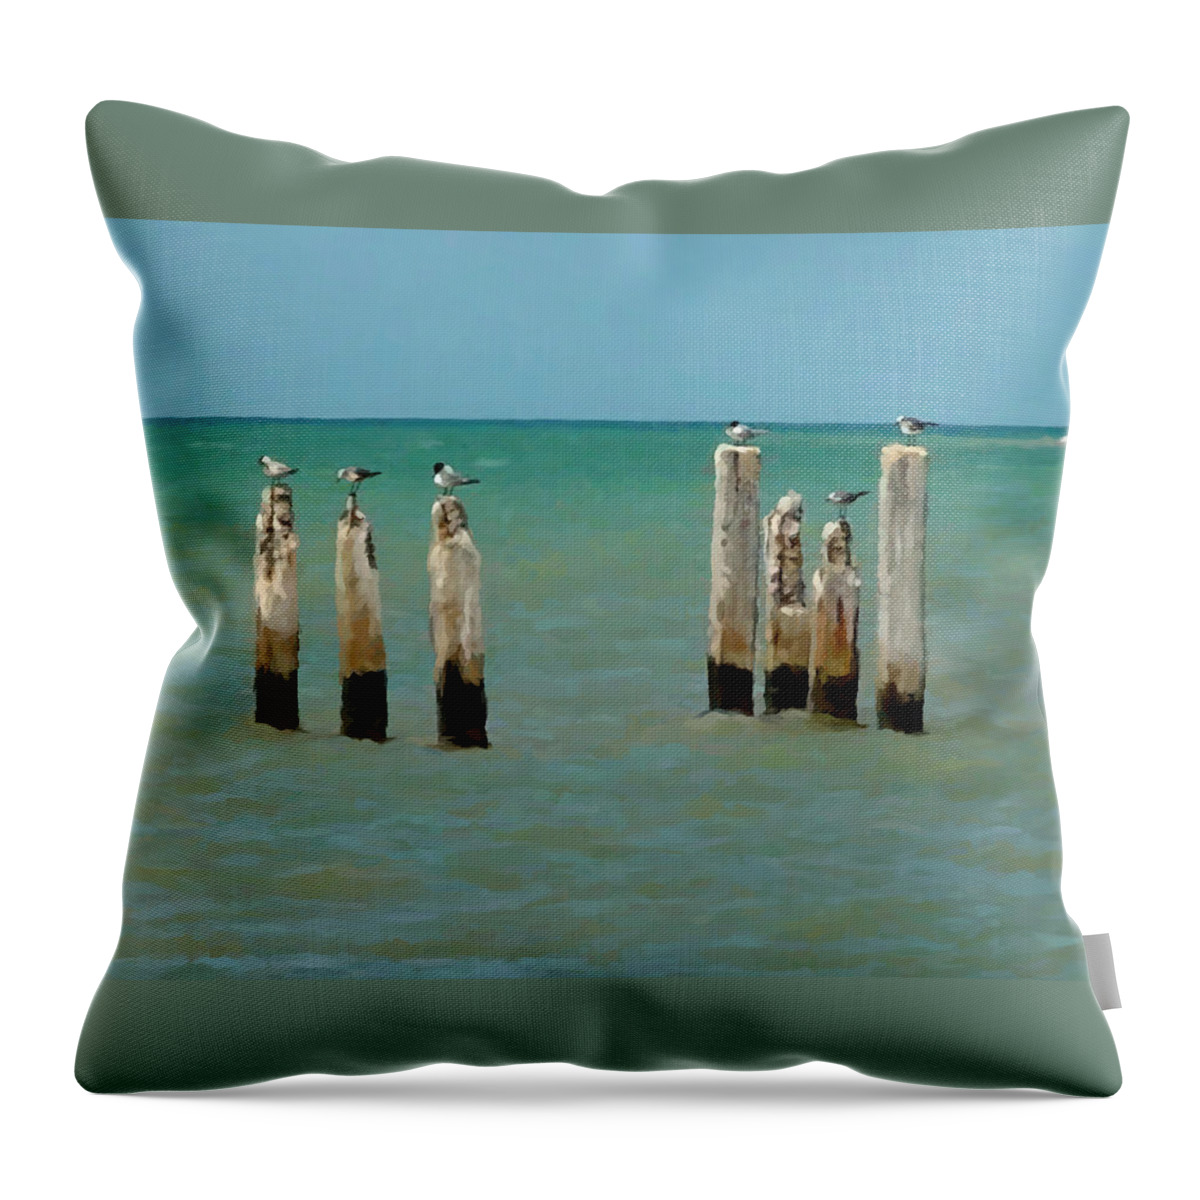 Water Birds Throw Pillow featuring the painting Birds on Sticks by David Van Hulst